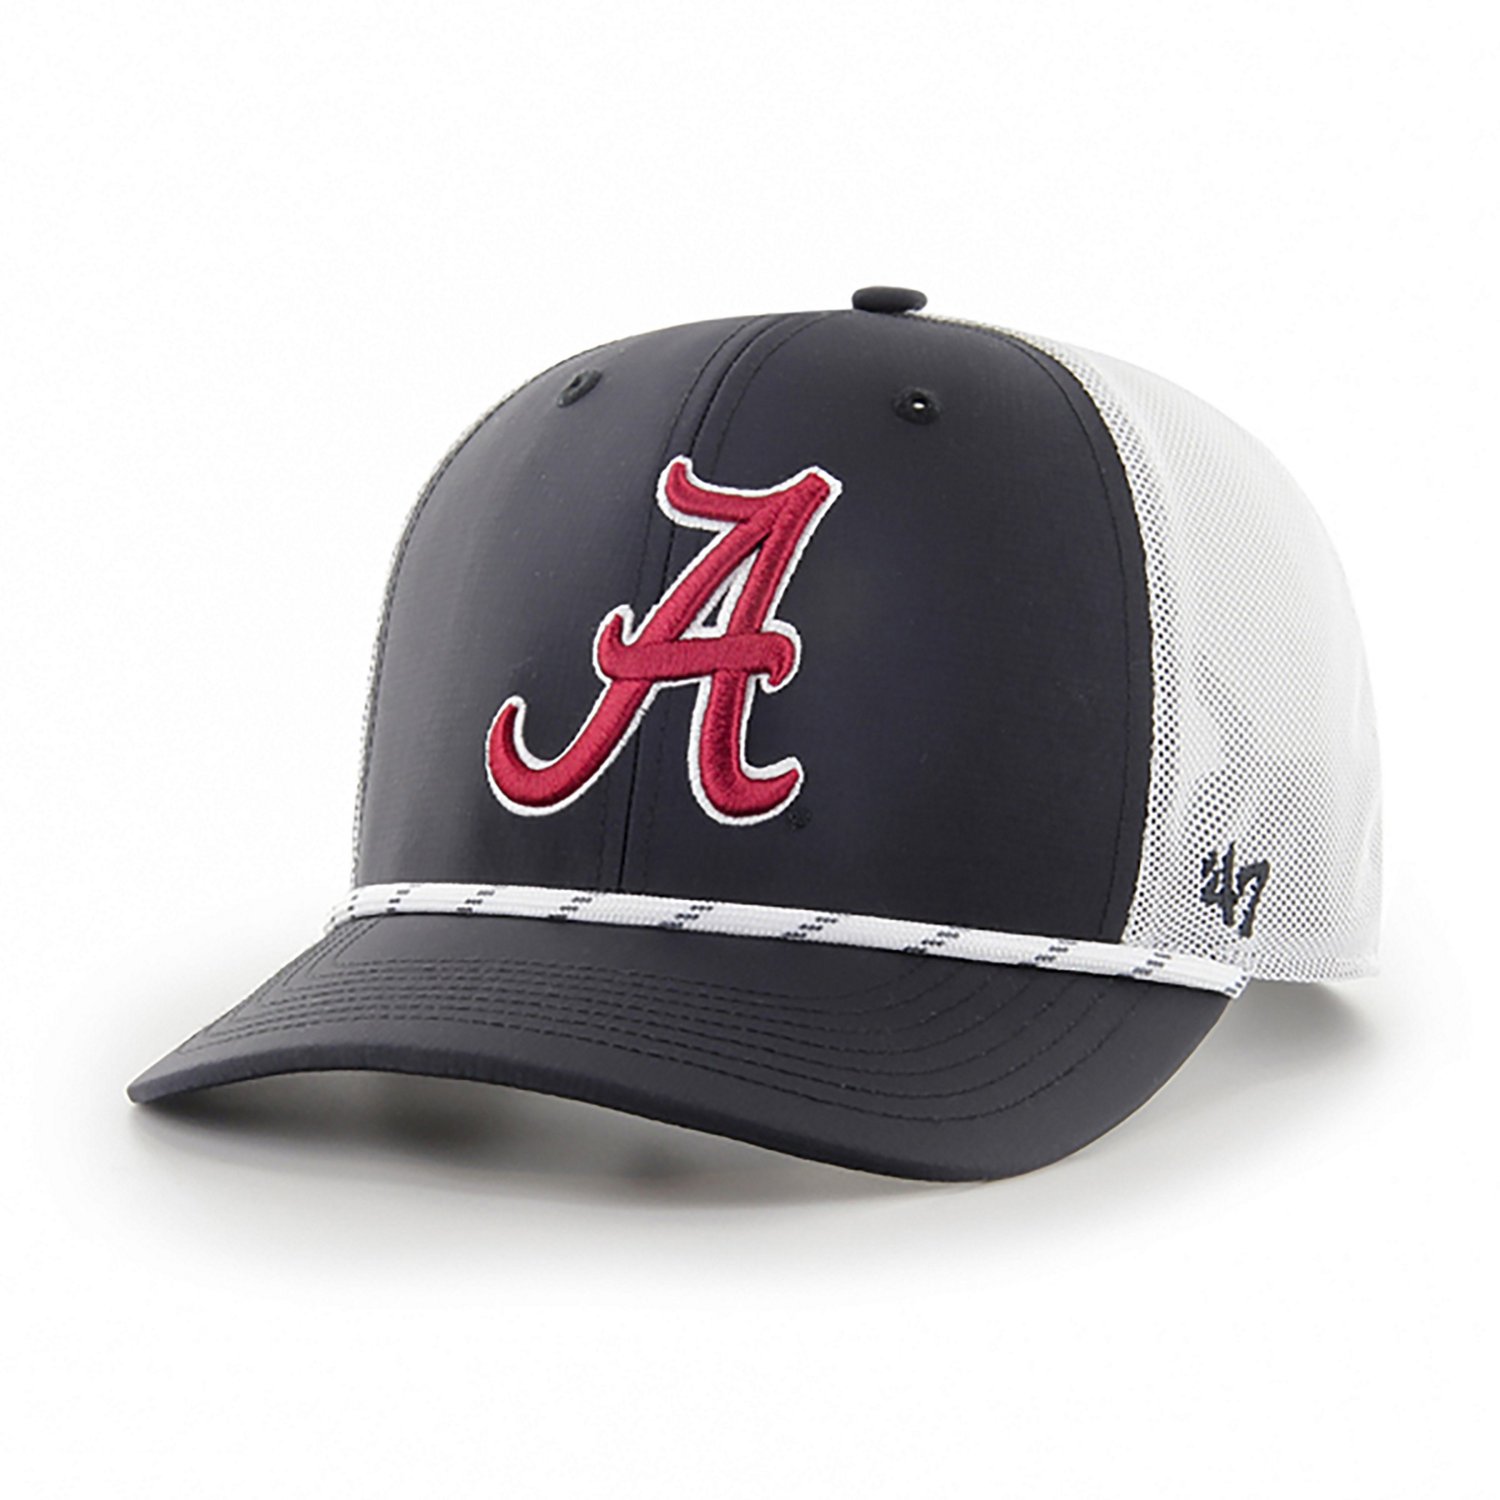  Atlanta Braves Dark Gray Clean Up Adjustable Hat, Adult One  Size Fits All : Sports & Outdoors